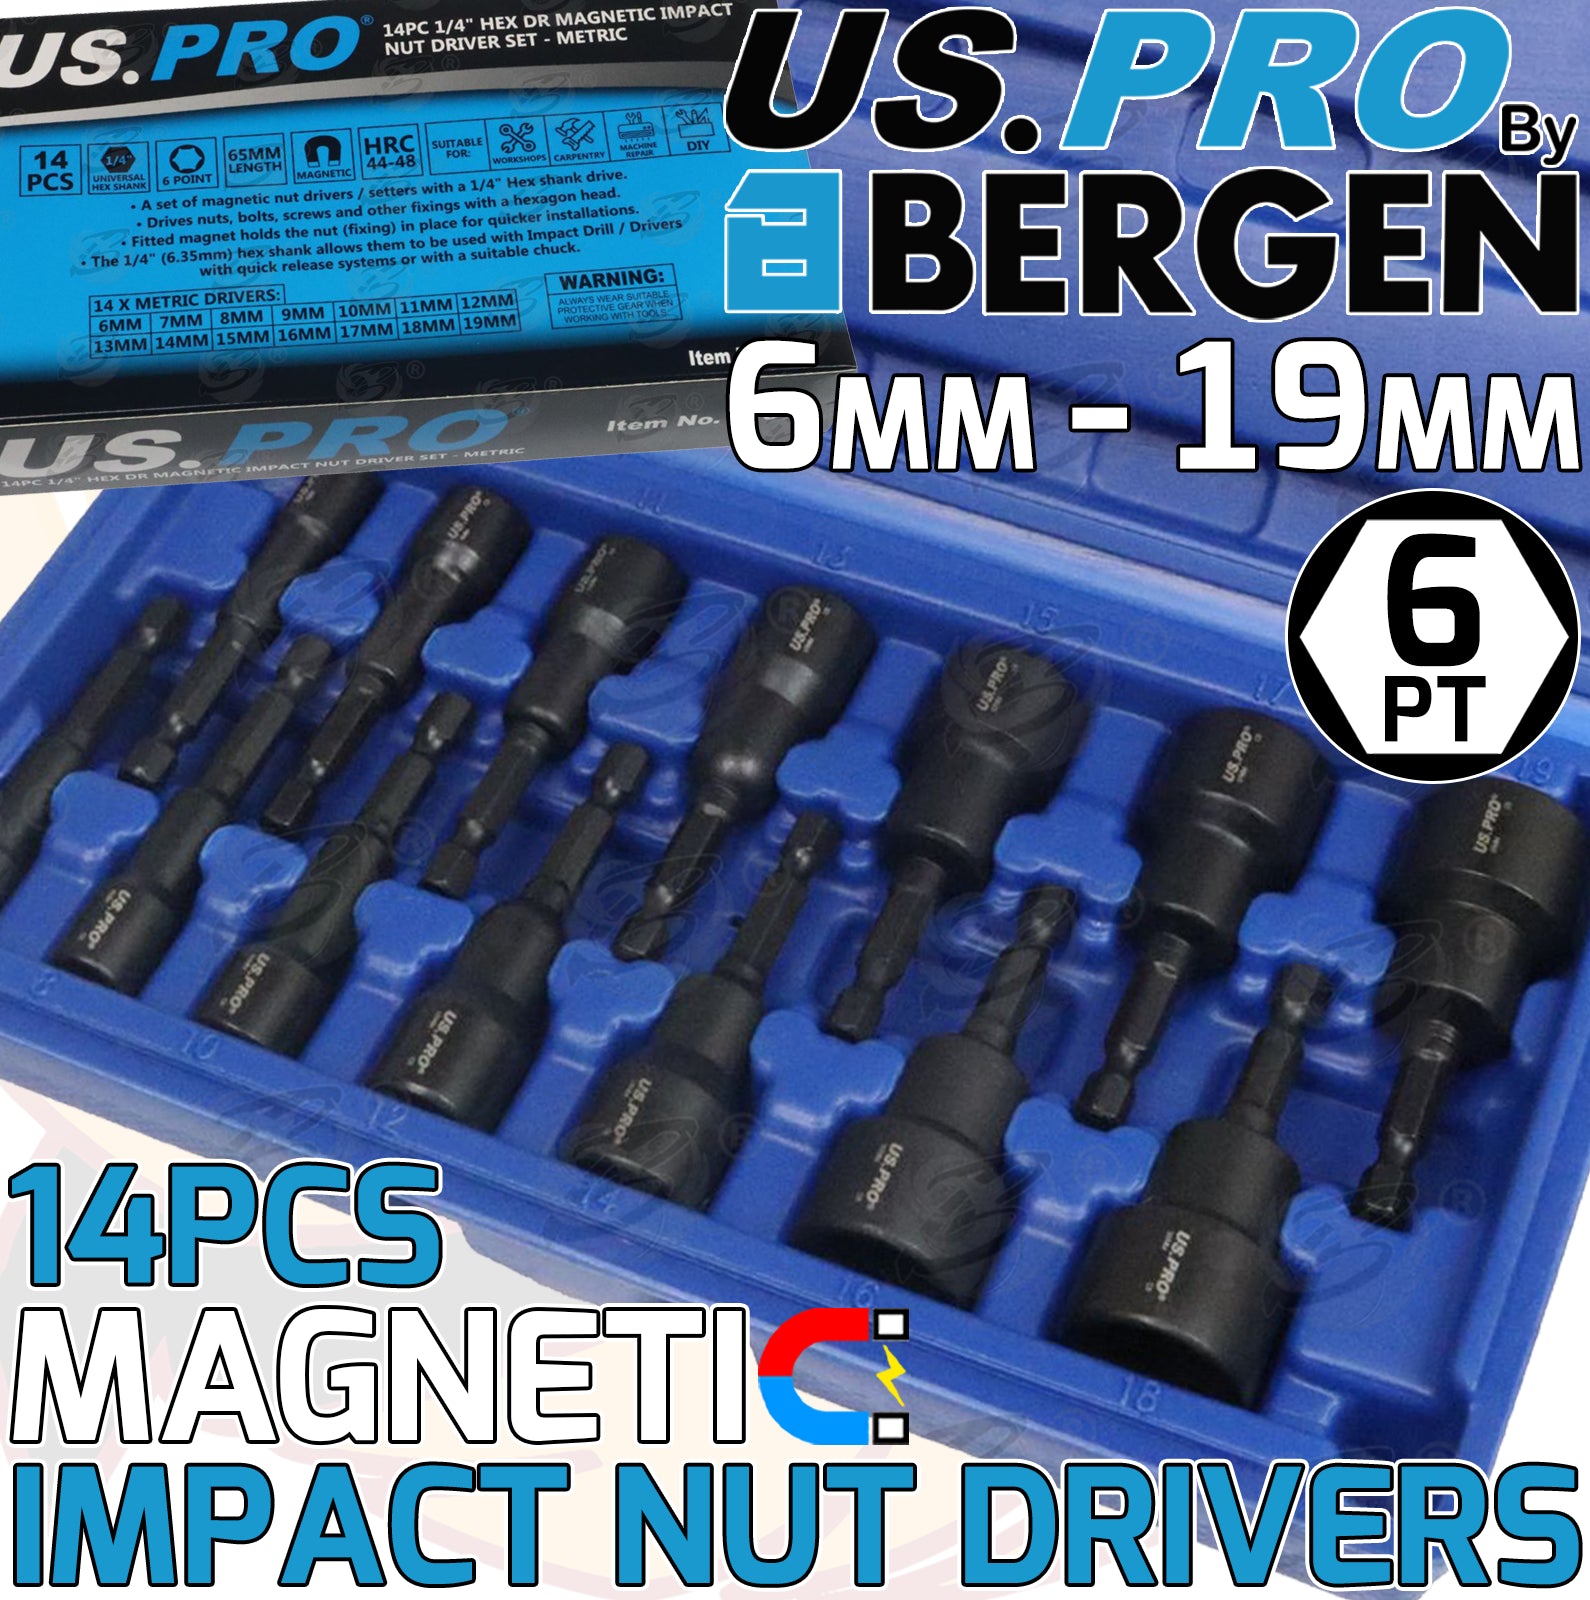 US PRO 14PCS MAGNETIC IMPACT NUT DRIVERS / RUNNERS ( 6MM - 19MM )